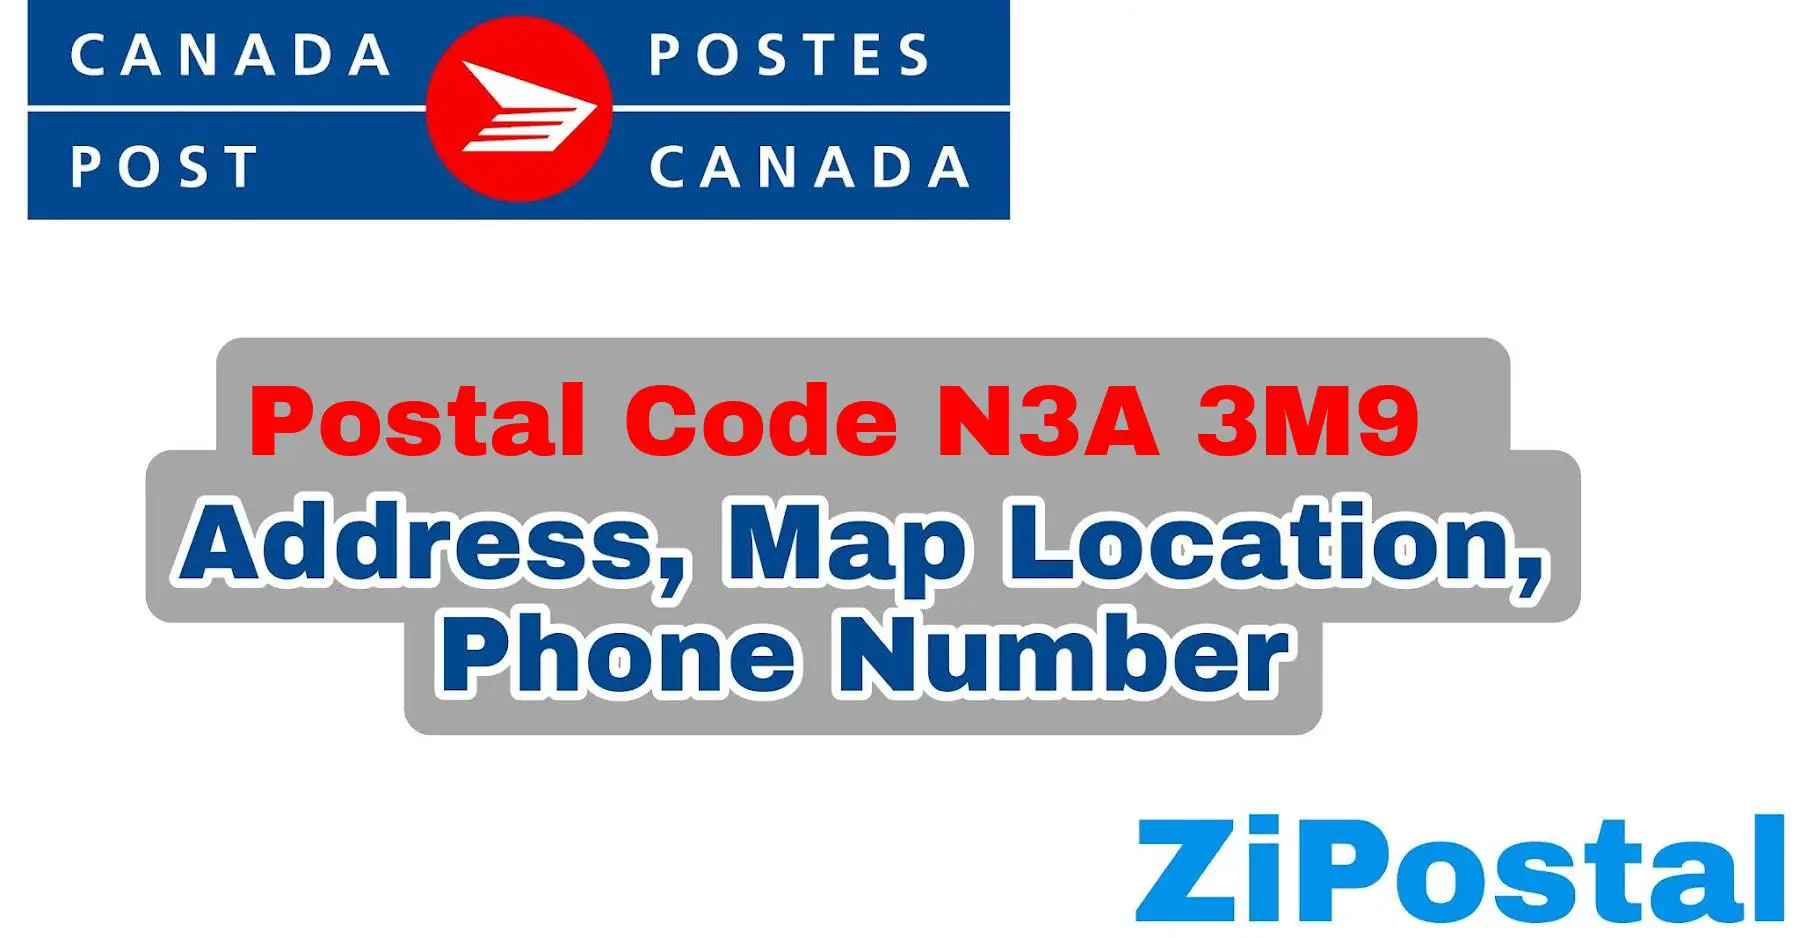 Postal Code N3A 3M9 Address Map Location and Phone Number